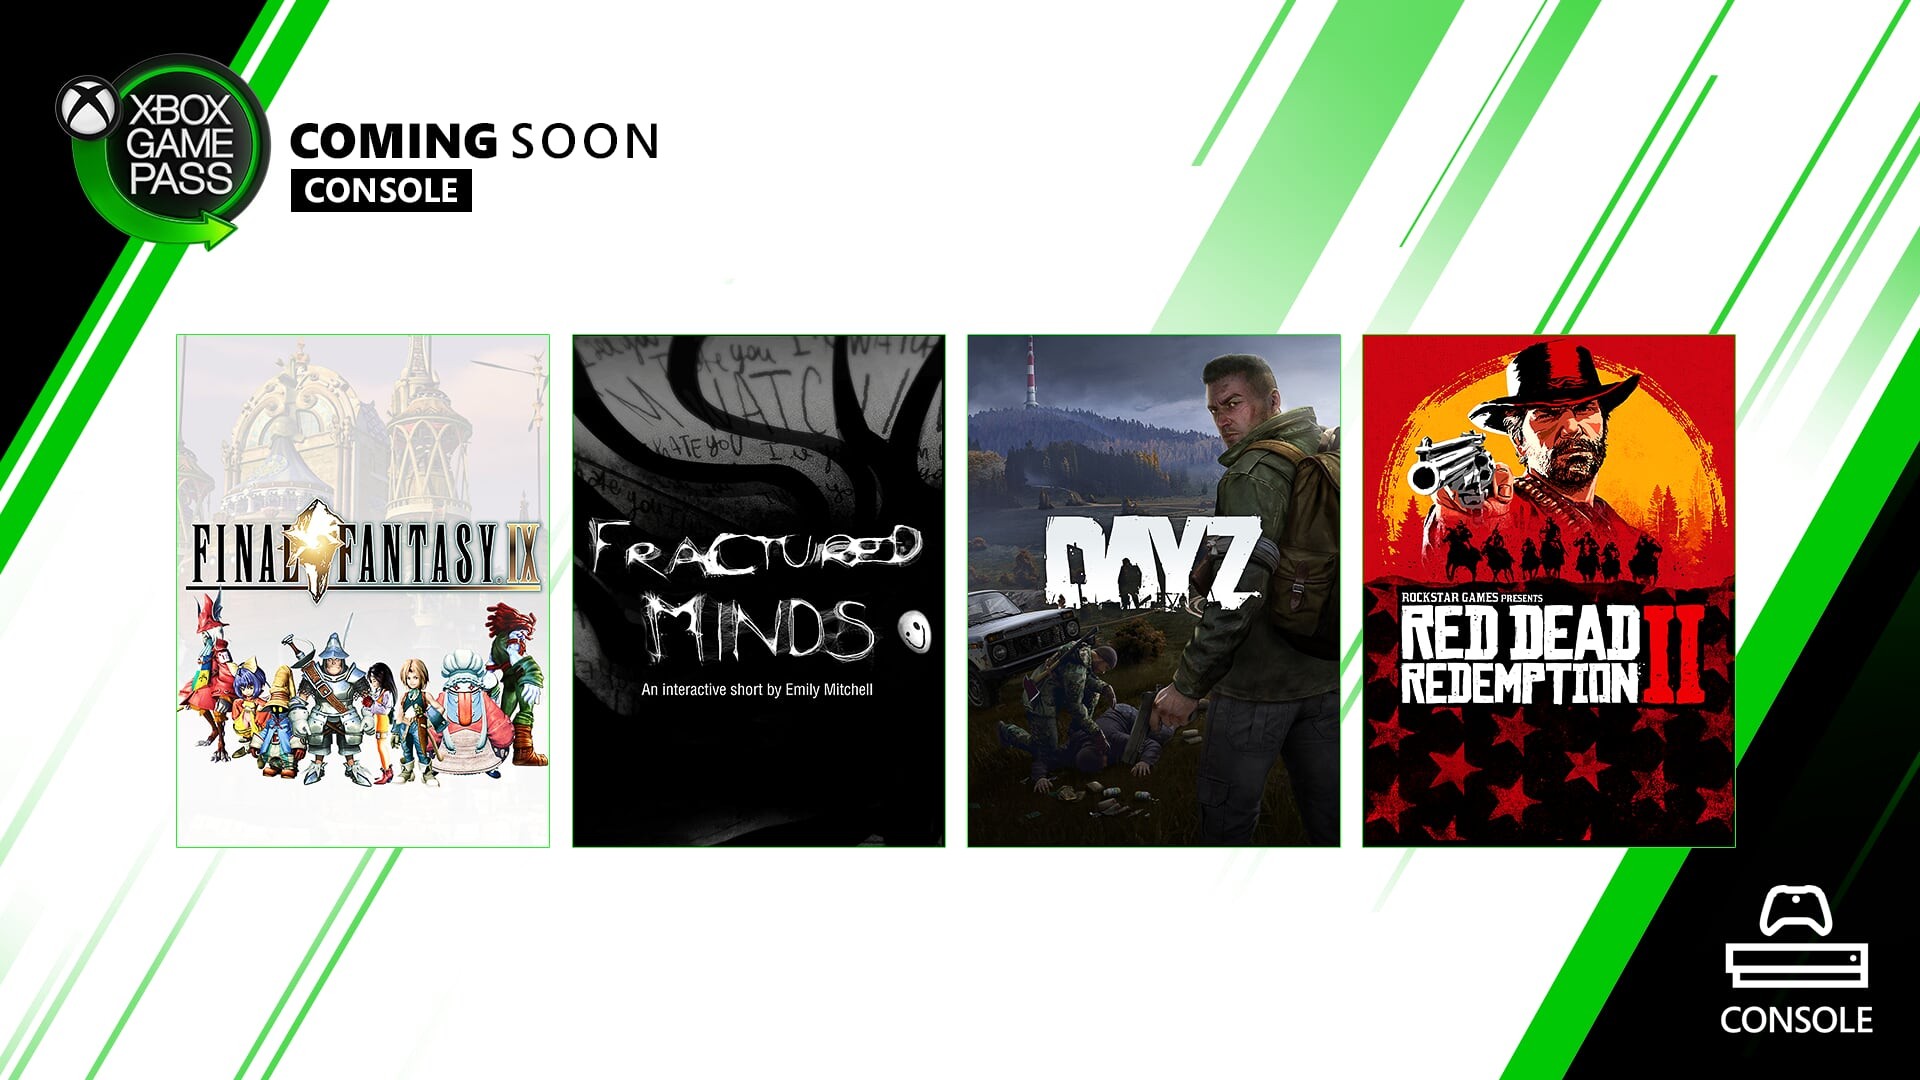 Vergevingsgezind slijtage moordenaar Coming Soon to Xbox Game Pass for Console: Red Dead Redemption 2, Day Z,  Final Fantasy IX, and More - Xbox Wire